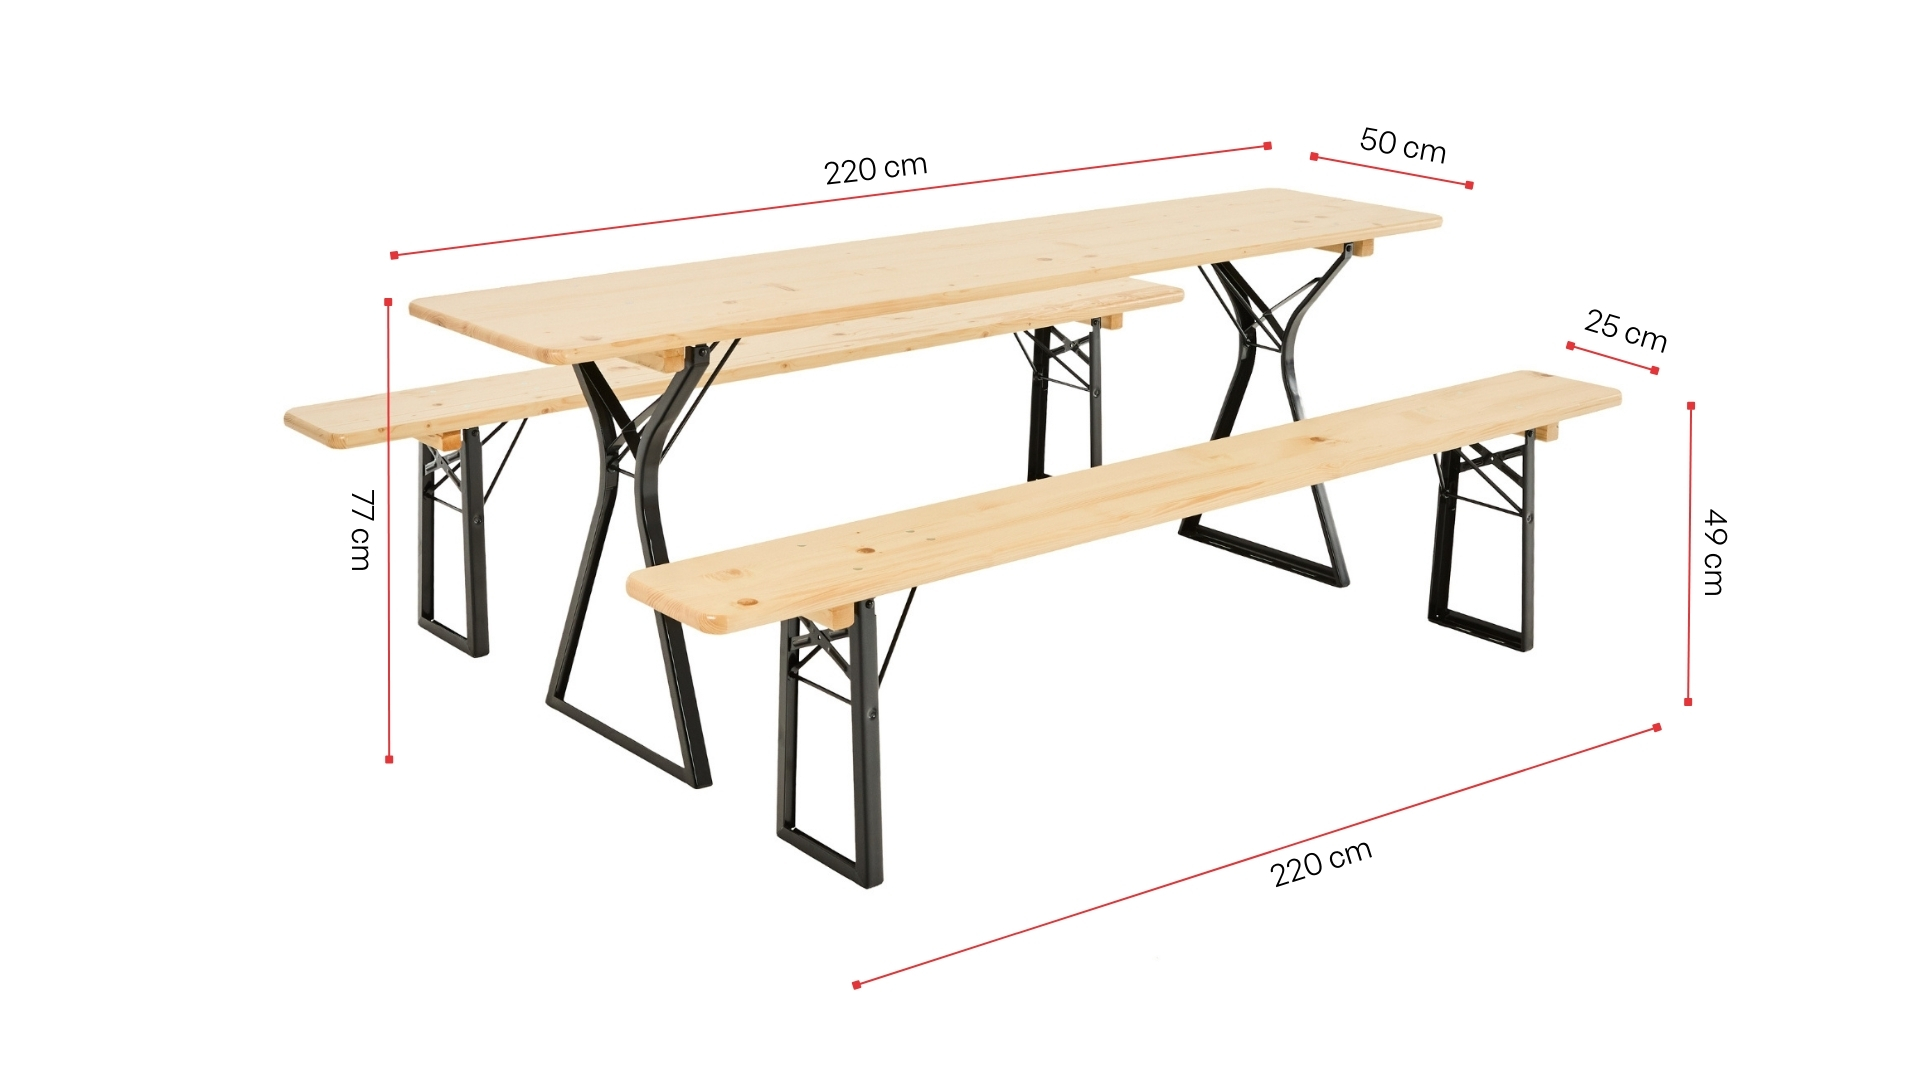 A classic beer garden table set with legroom in nature is shown with its dimensions.